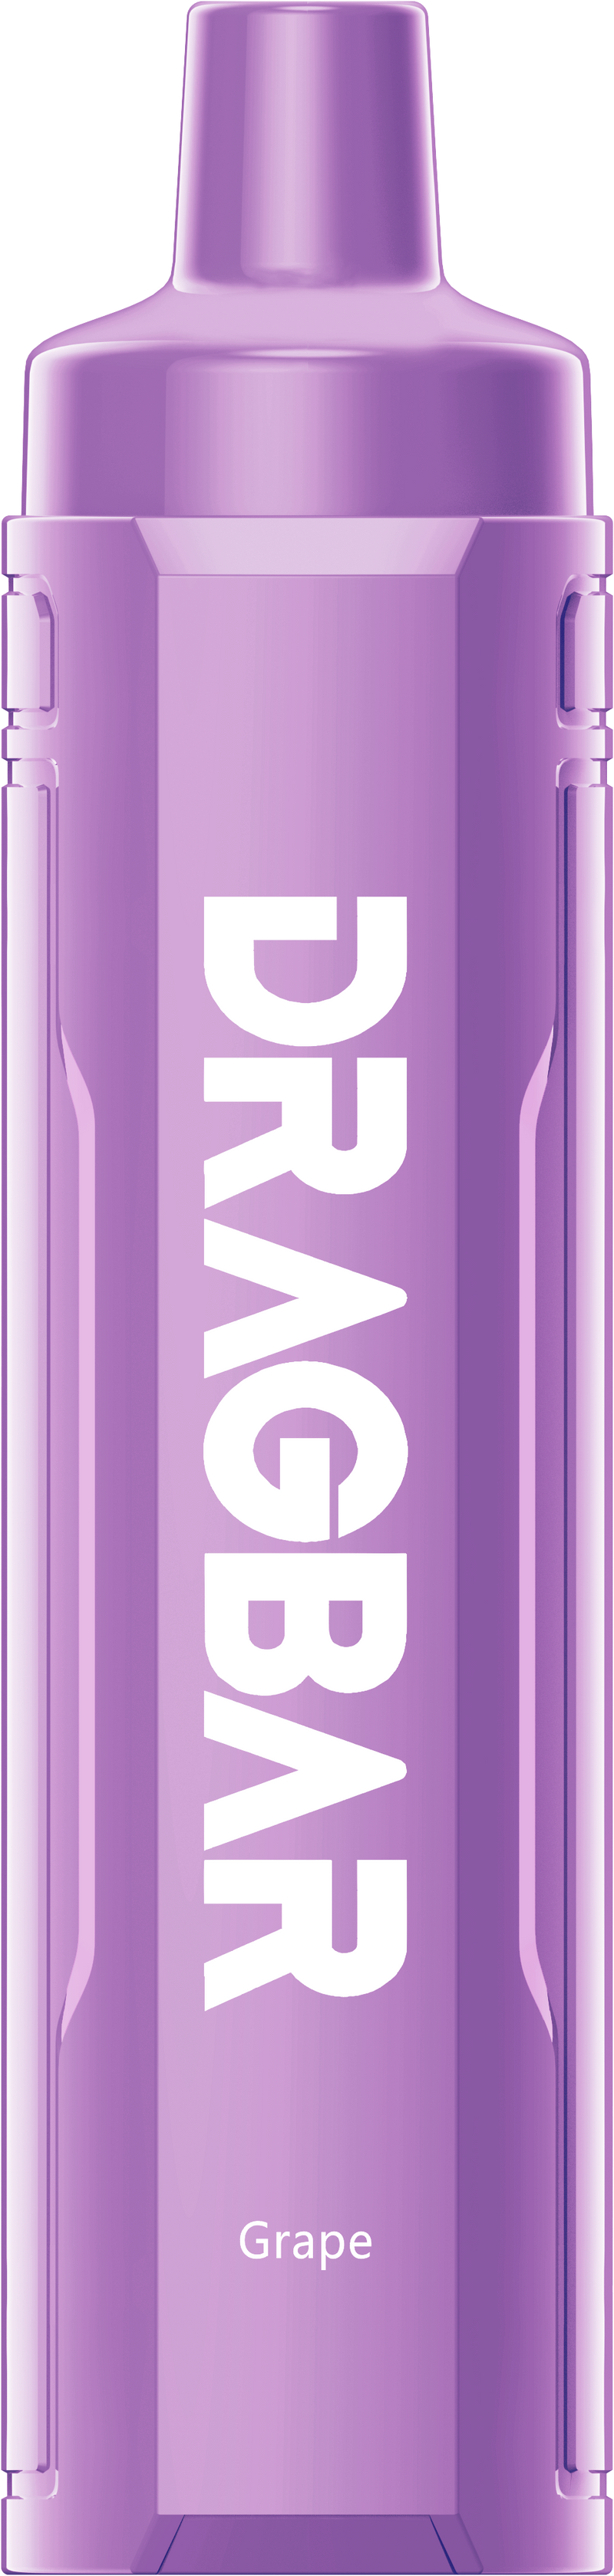 ZOVOO - DRAGBAR F1000 - Grape Ice - 0mg Disposable - Super Vape Store